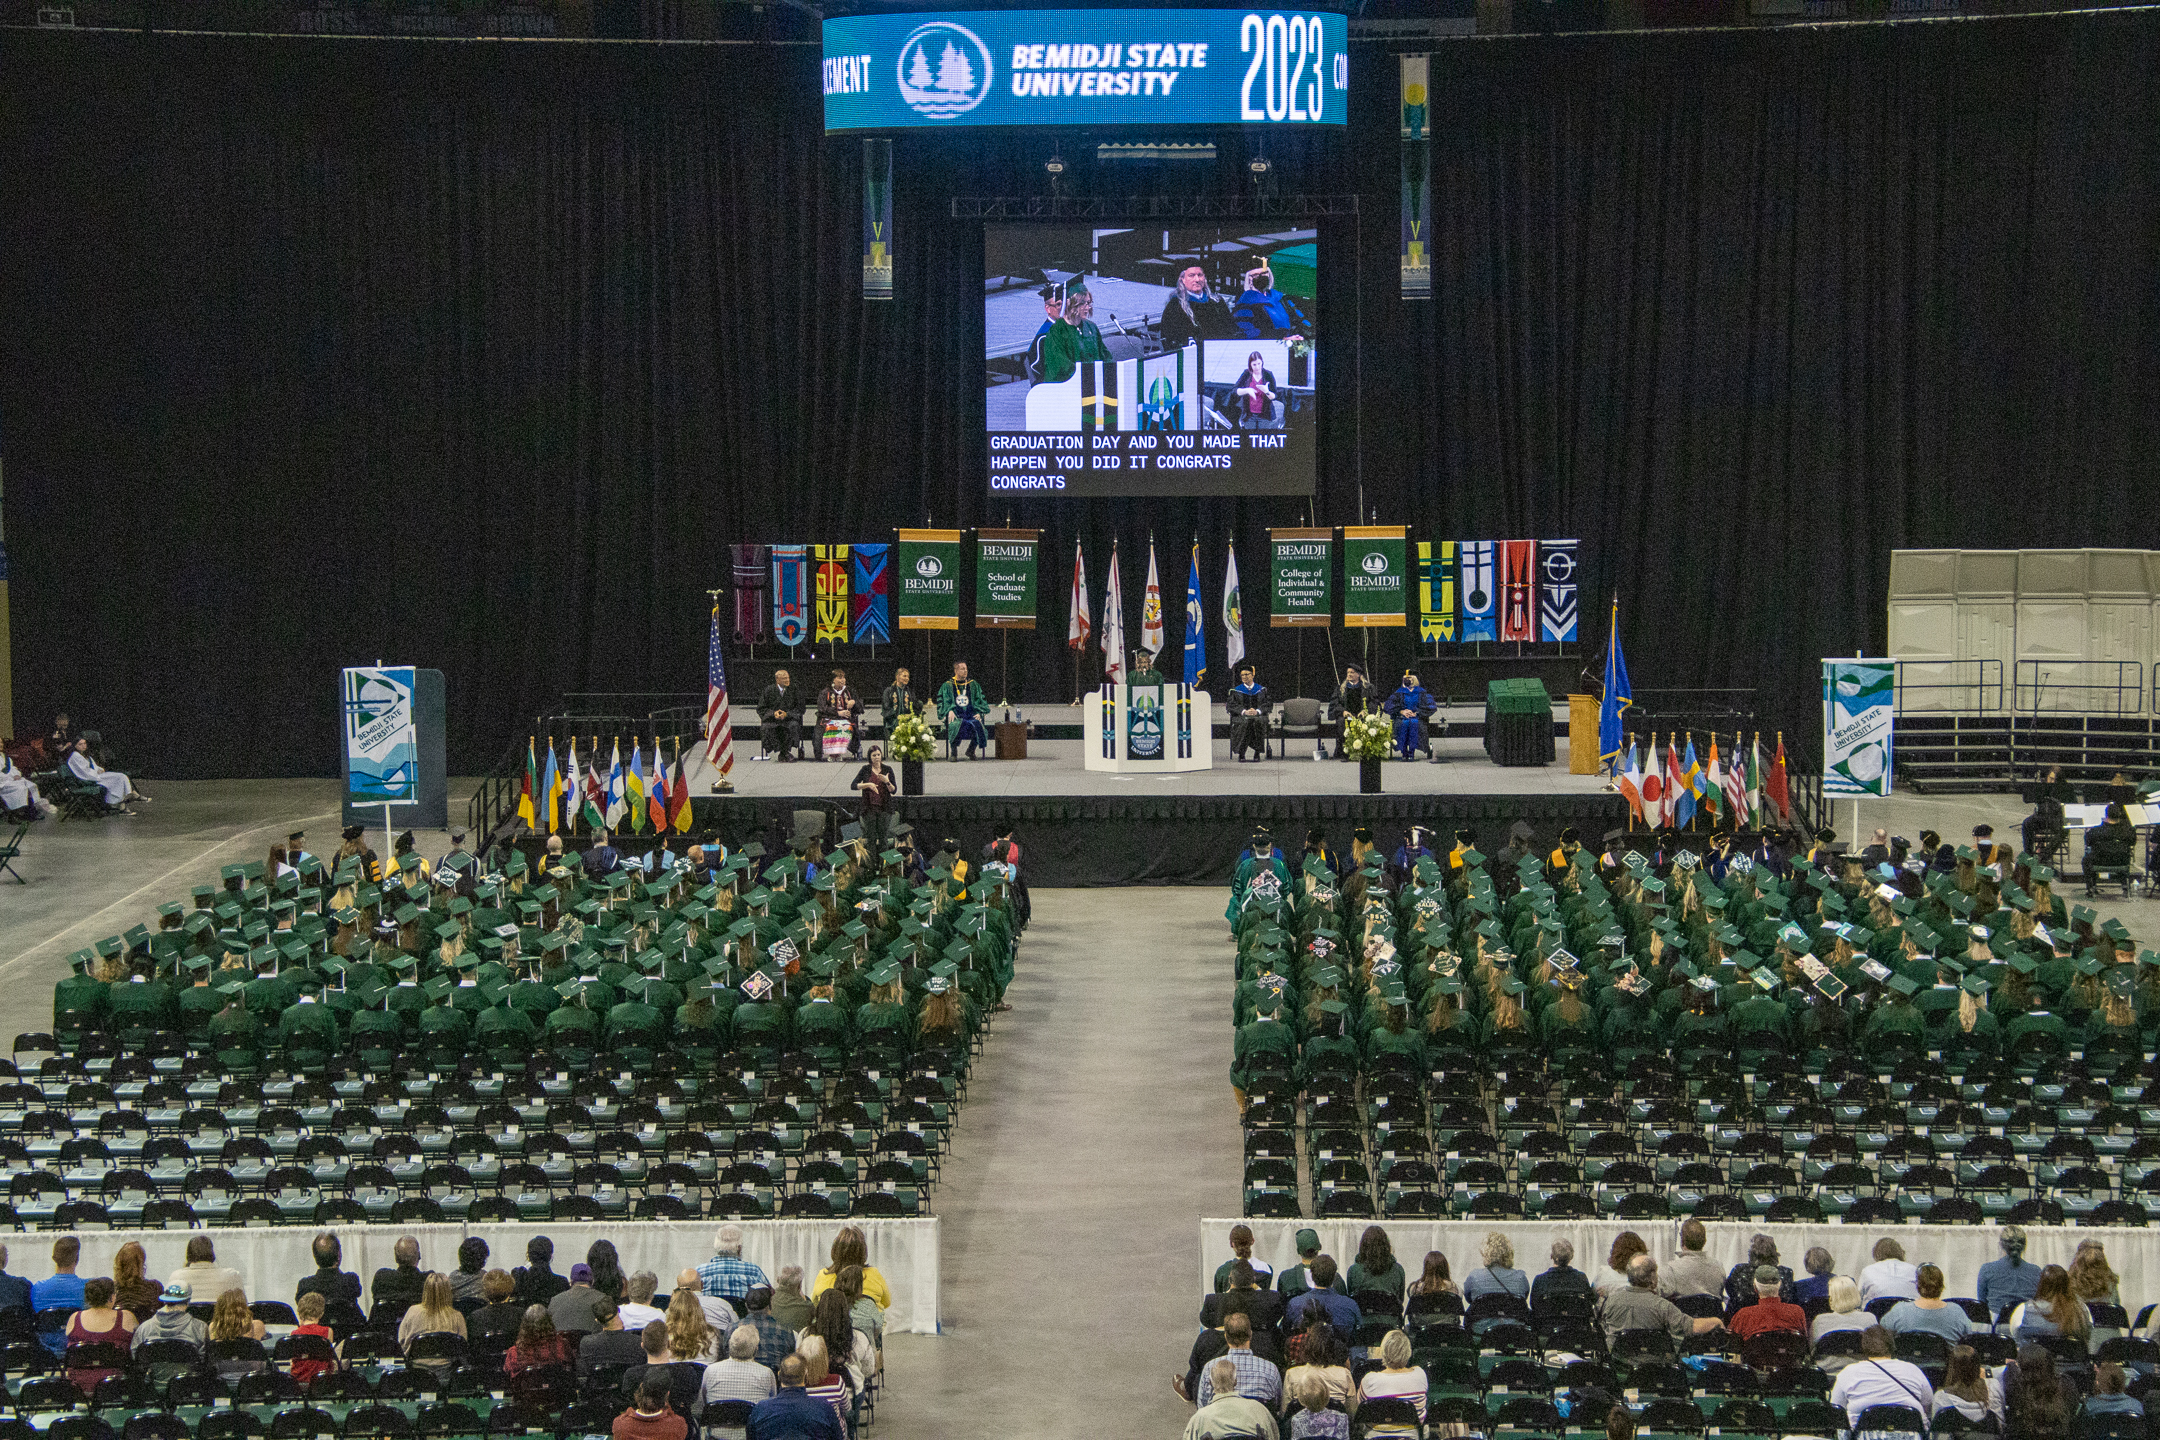 Students at BSU's commencement on May 5